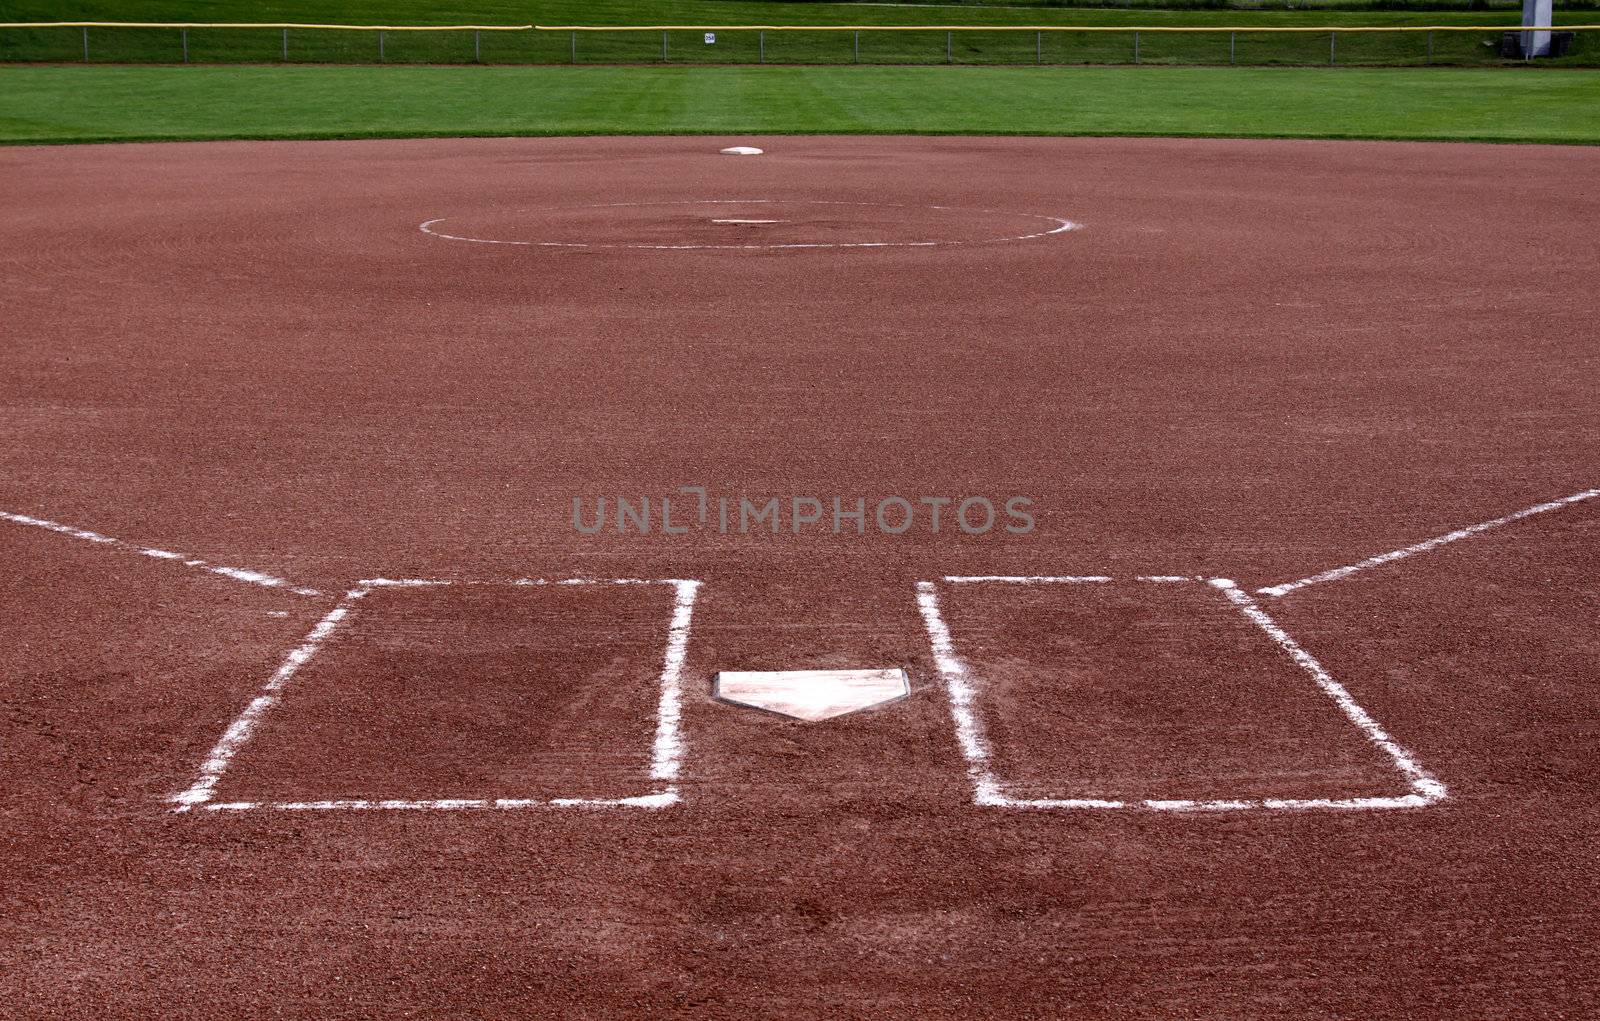 The view from behind the plate on a vacant softball field.